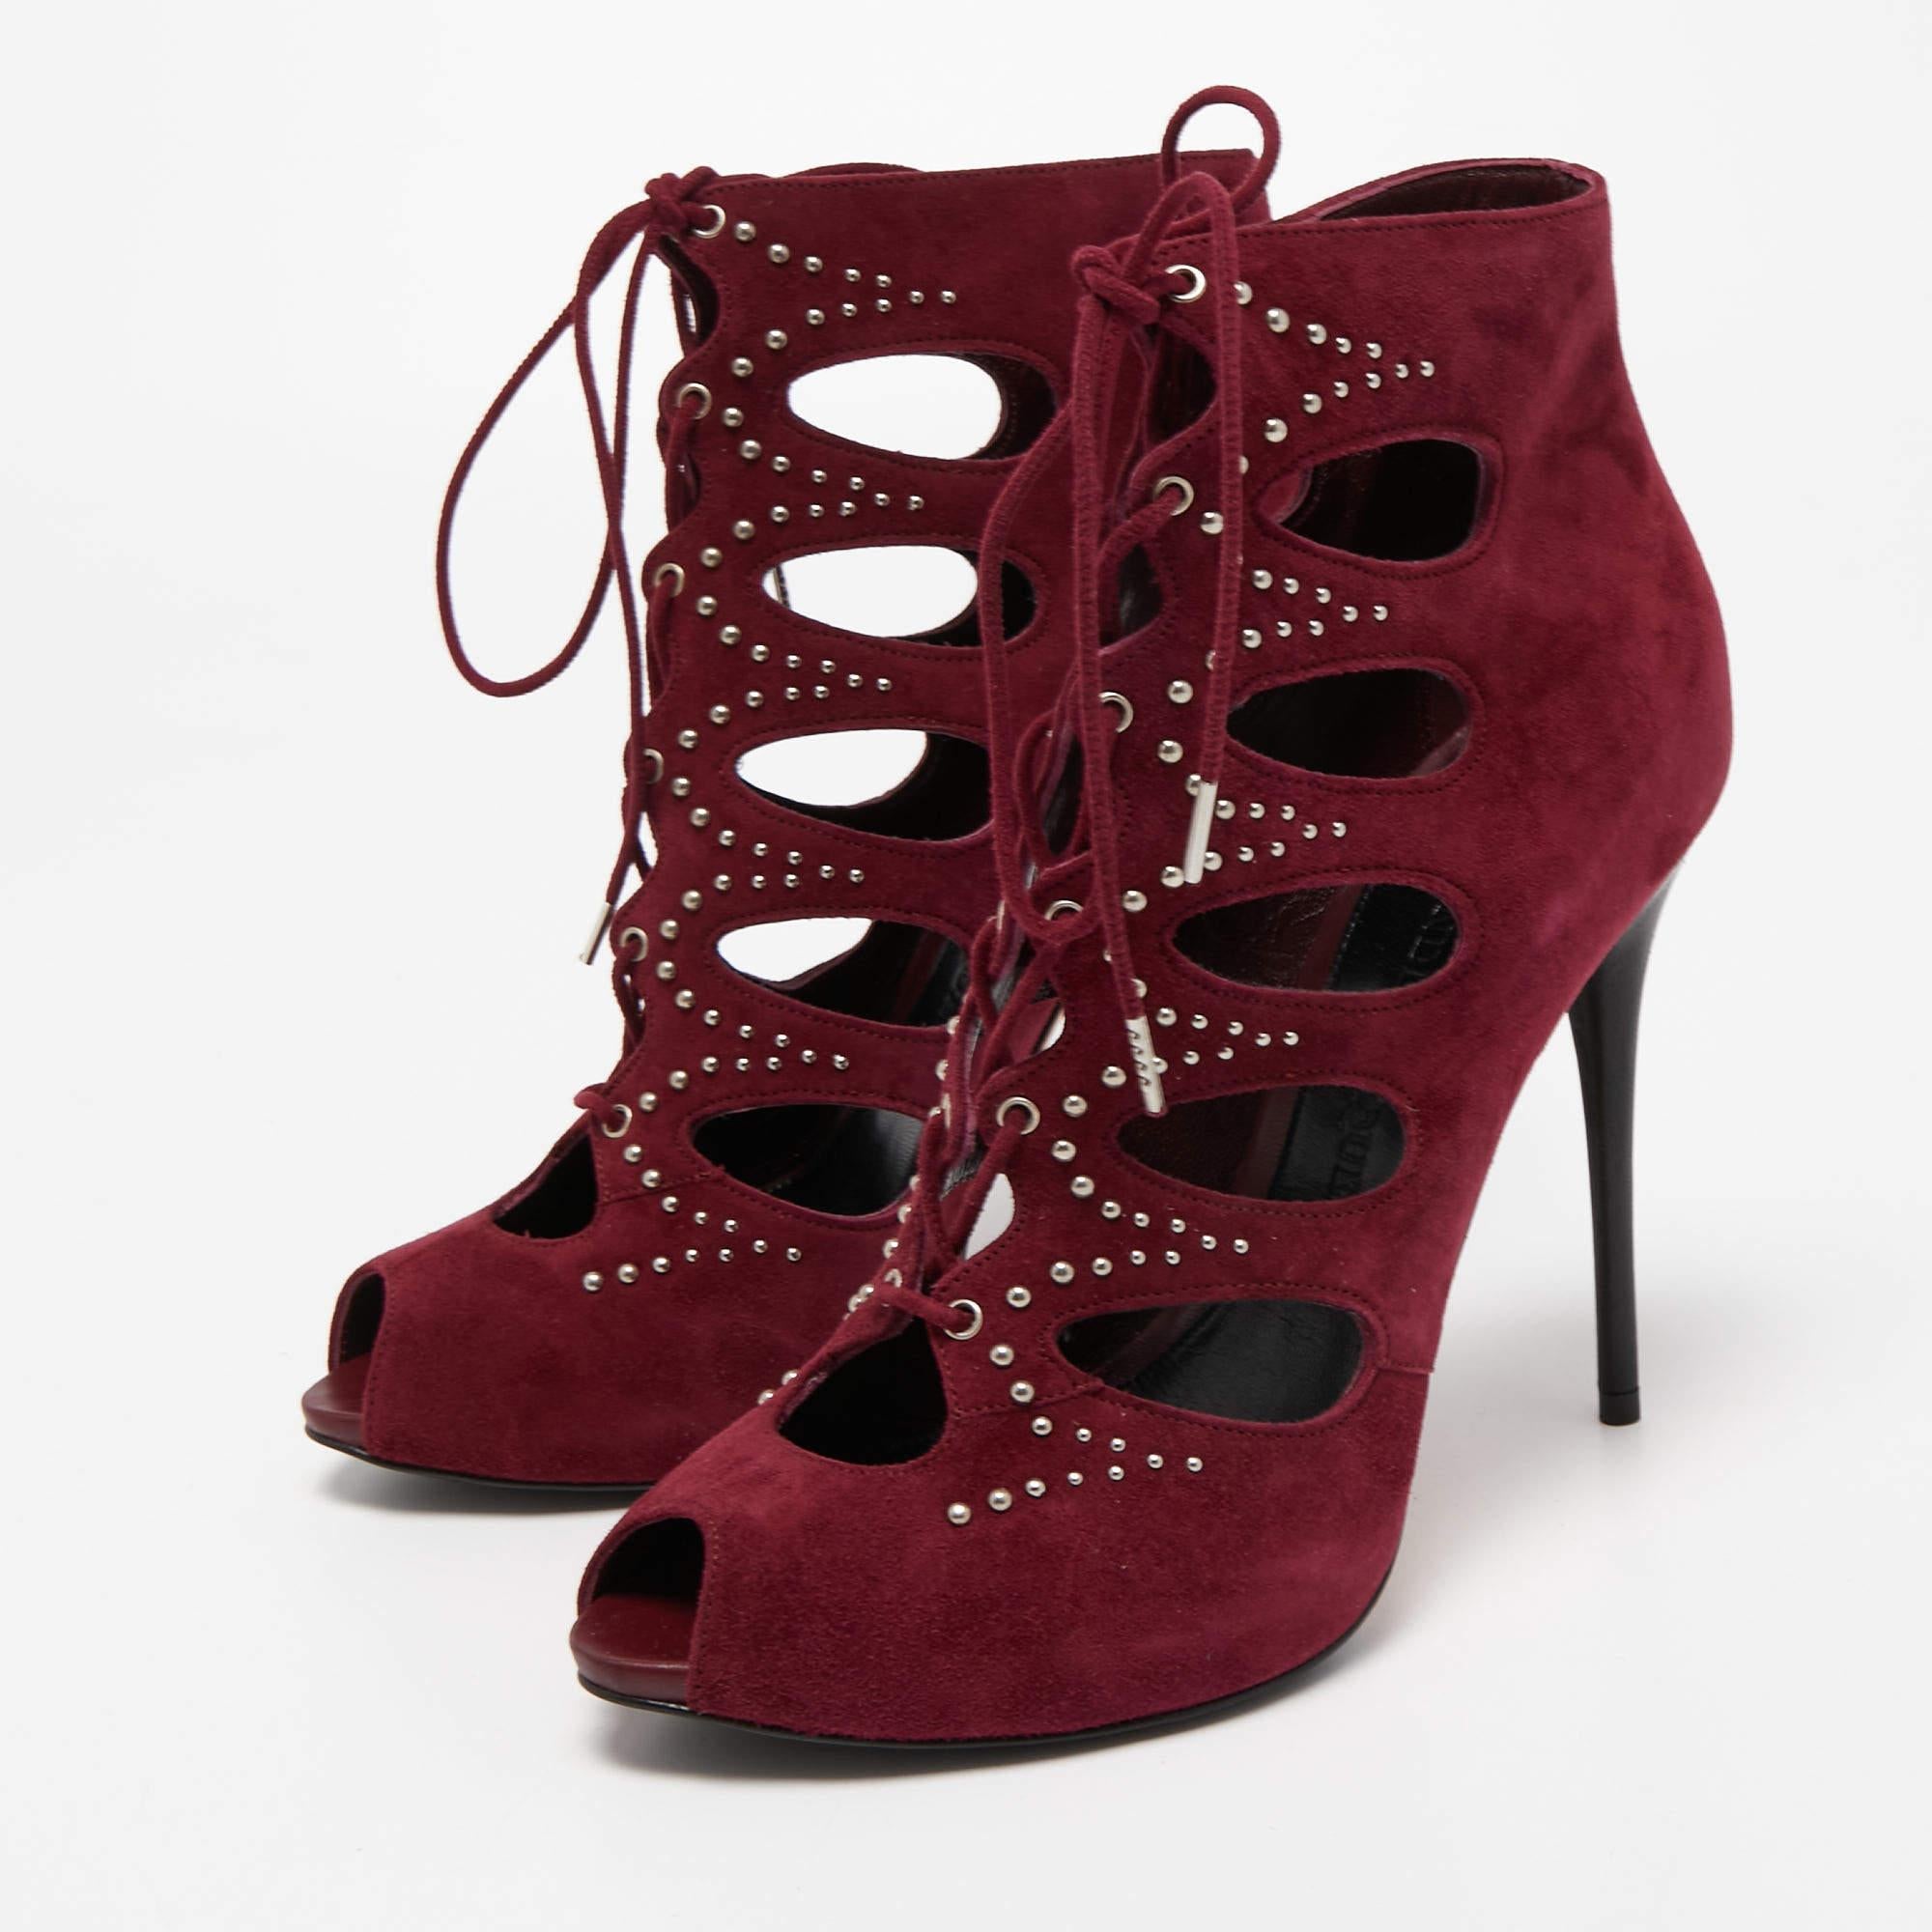 Alexander McQueen Burgundy Suede Cut Out Lace Up Ankle Booties Size 37.5 5